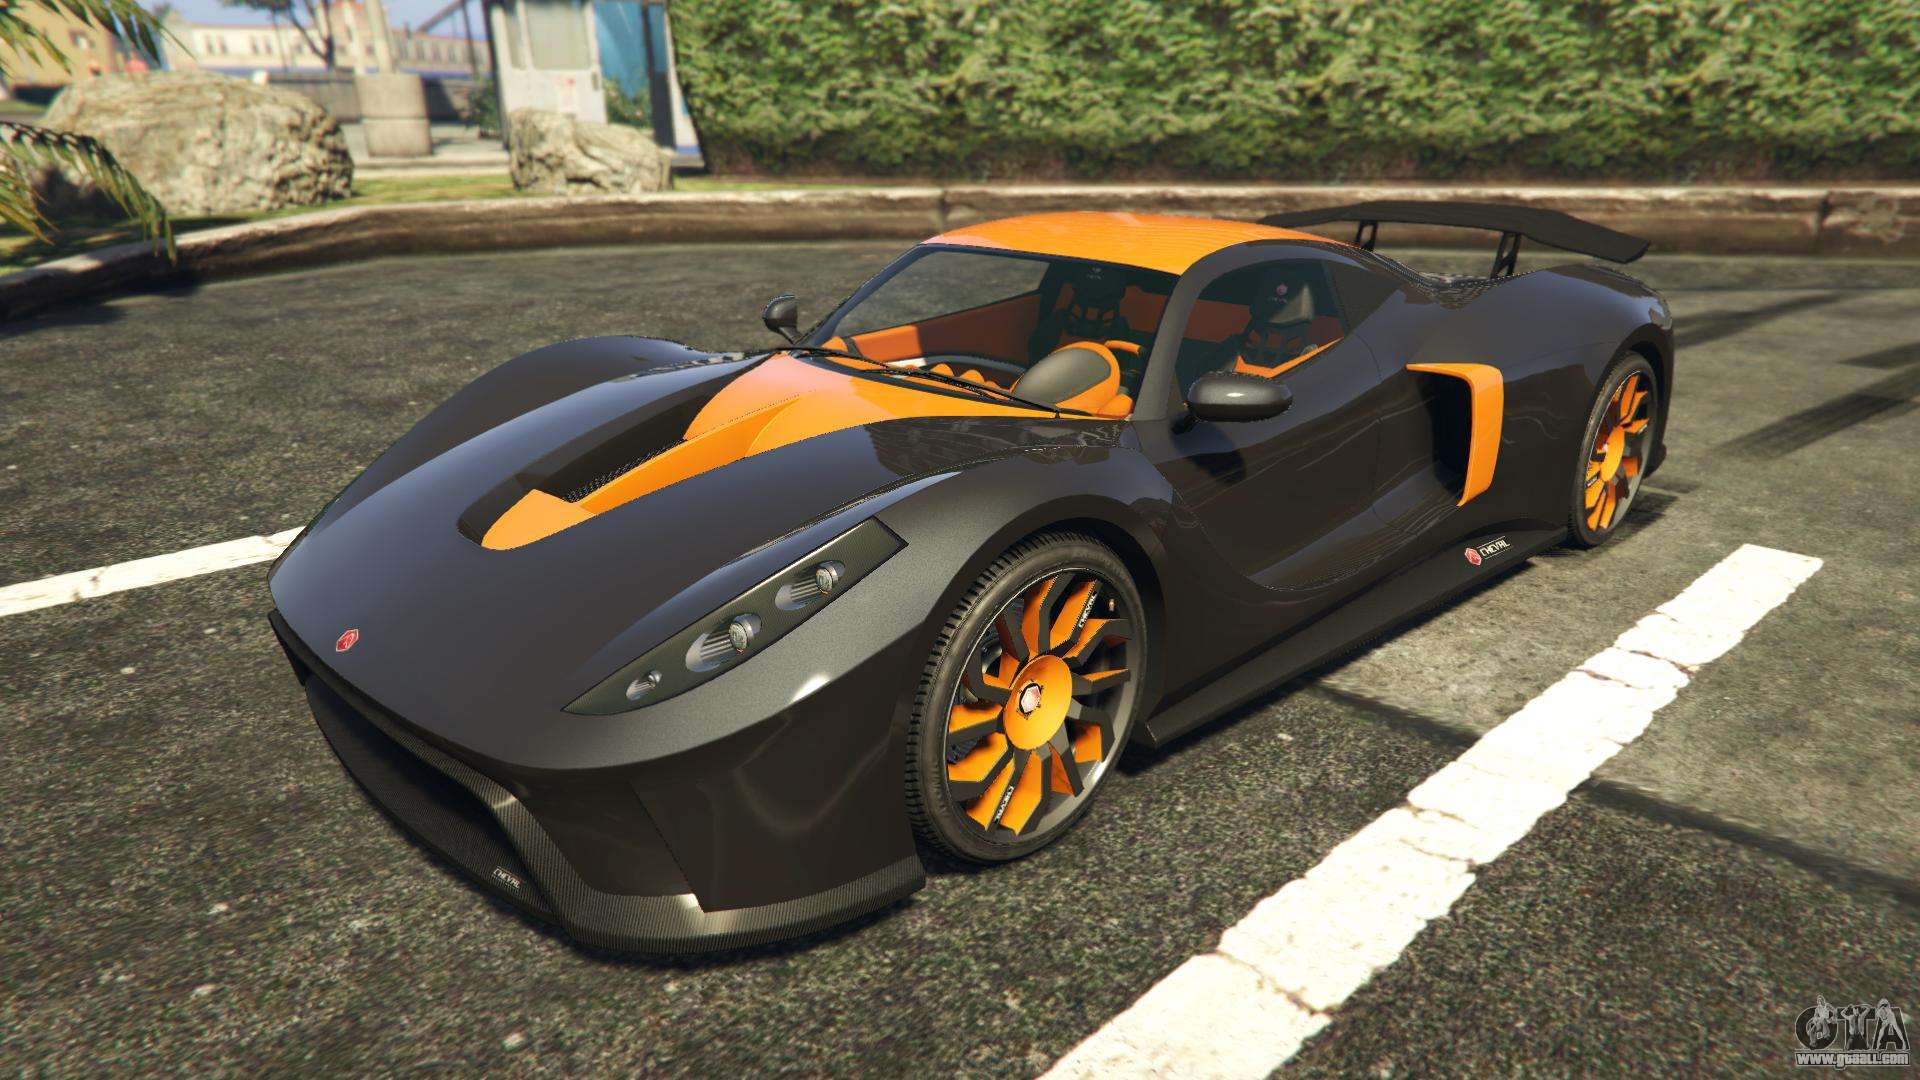 GTA 5 vehicles: all cars and motorcycles, planes and helicopters, boats ...